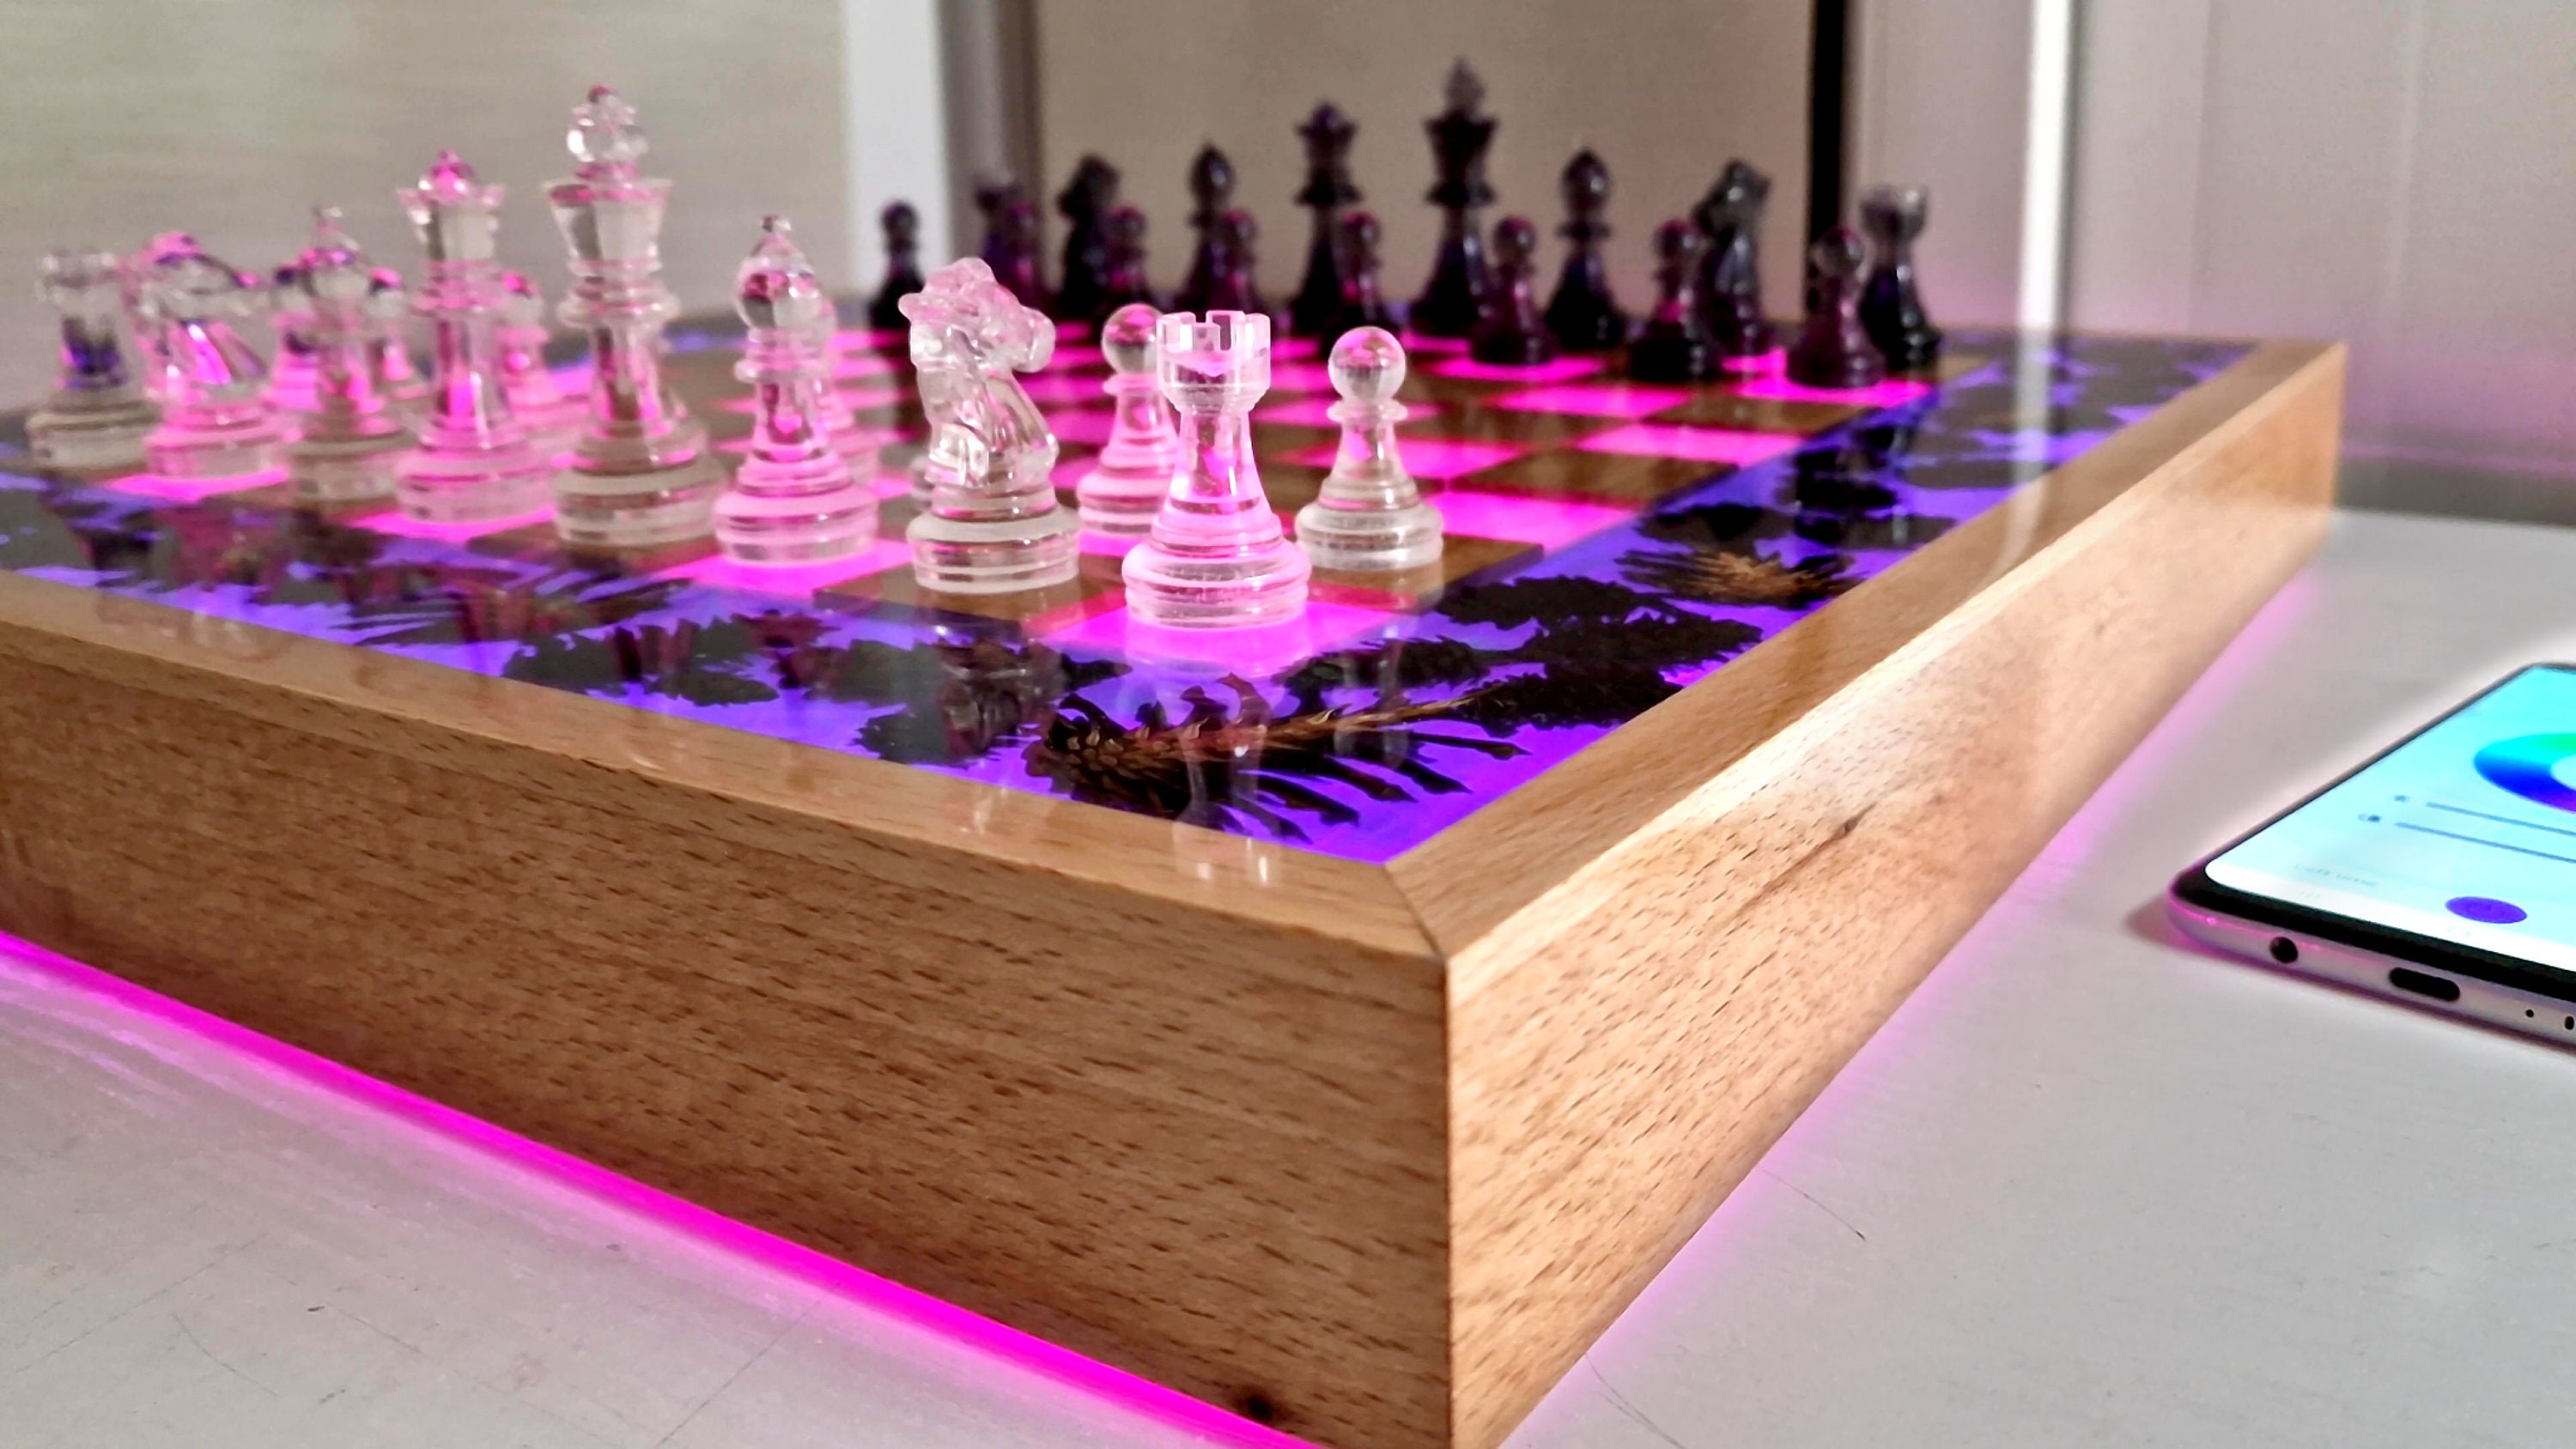 The Original Floating Chess Board